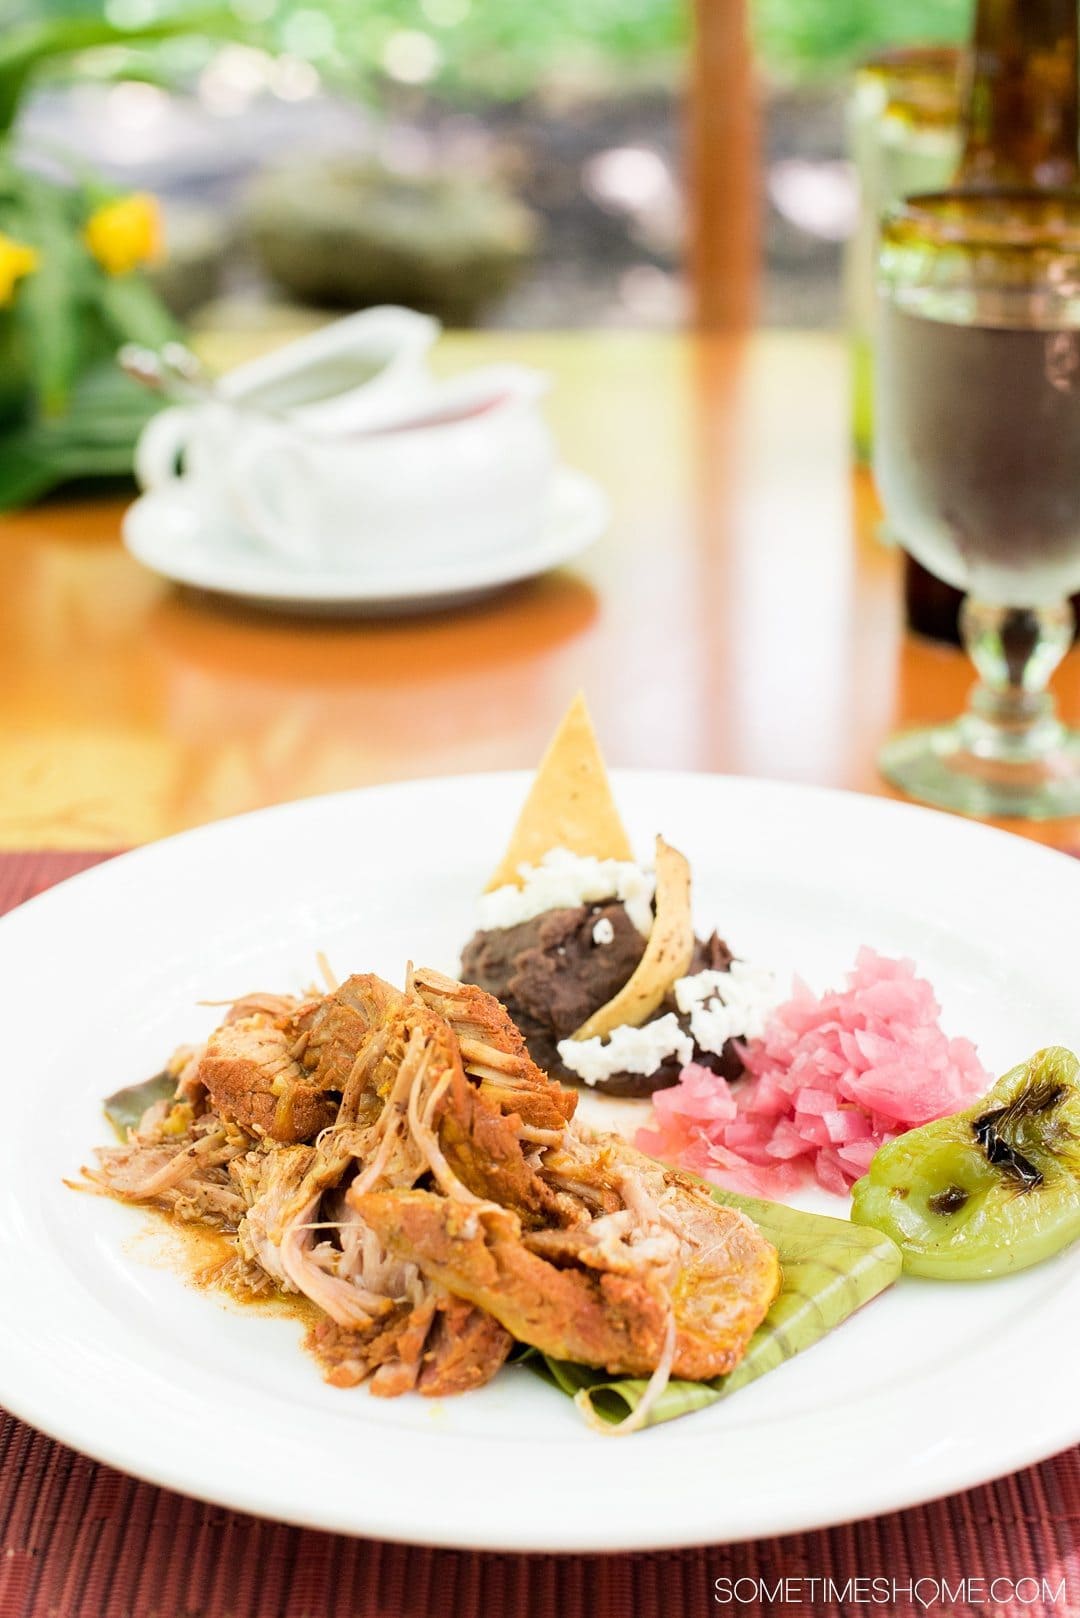 6 Unique Foods to Try in the Yucatan Peninsula on Sometimes Home travel blog. Photos of Cochinita Pibil, served with pickled onions and black beans.